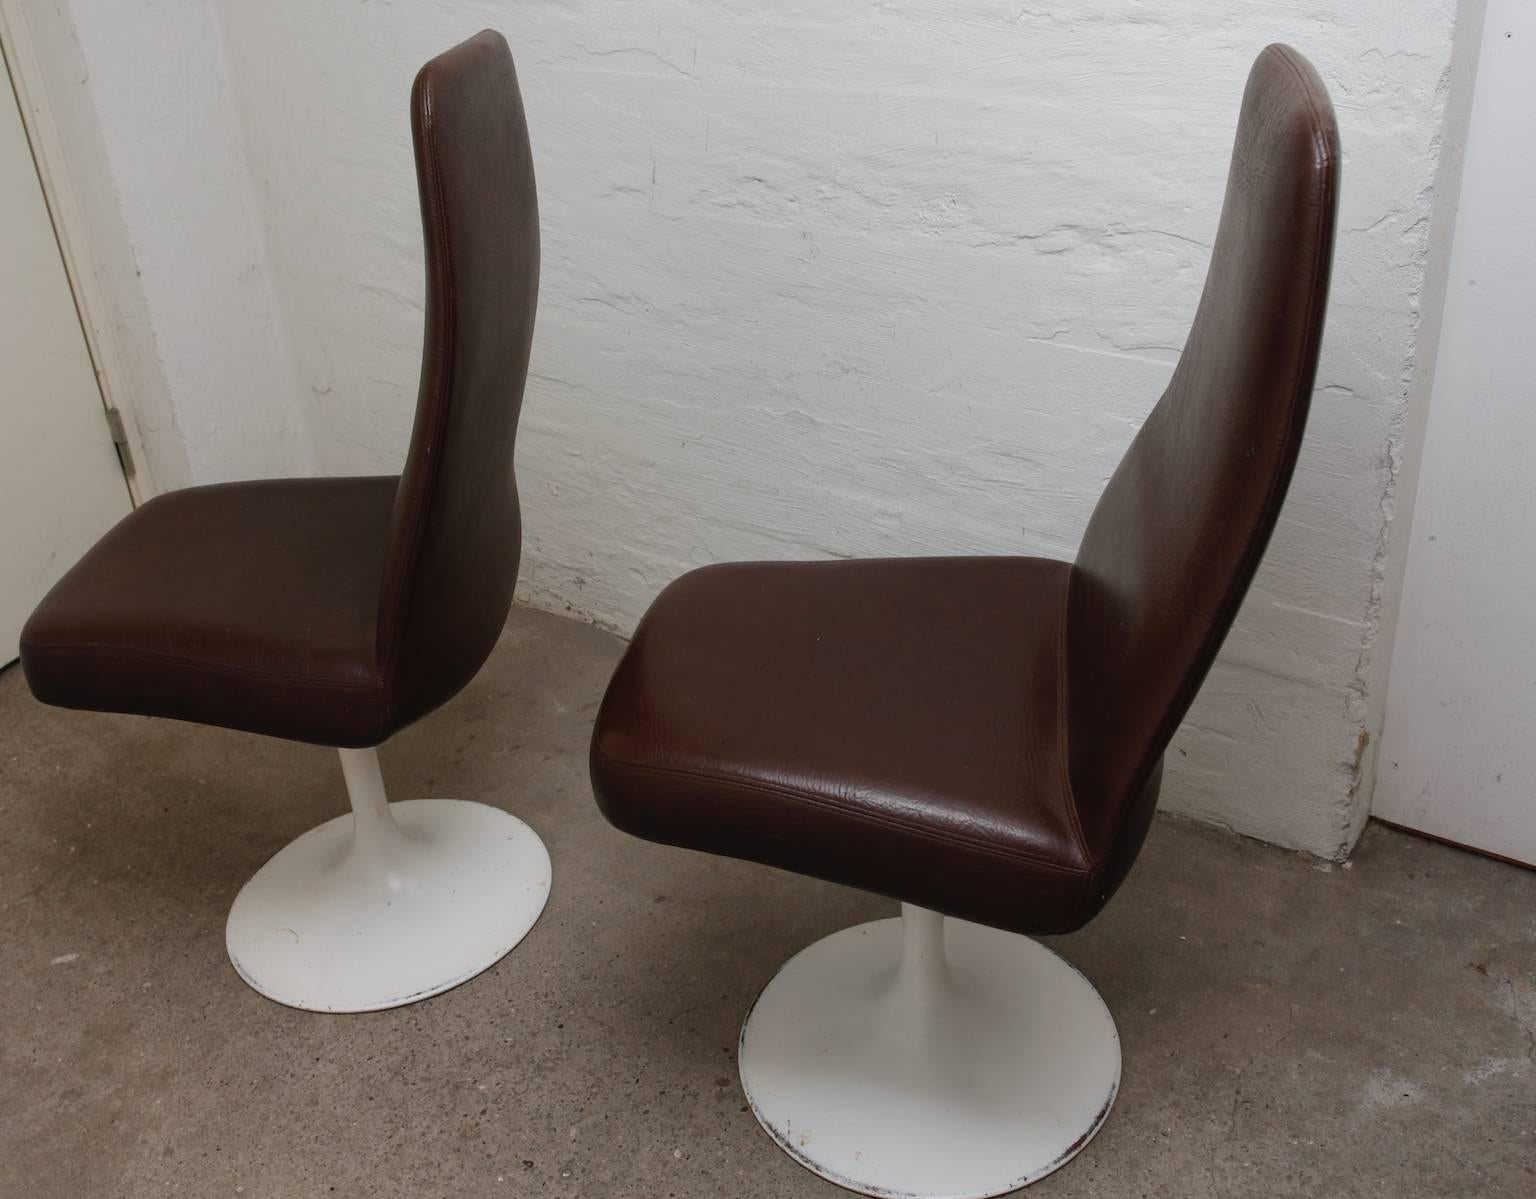 Two Chairs with Matching Table and Tulip foot by Johanson Design, Sweden, 1970s For Sale 2